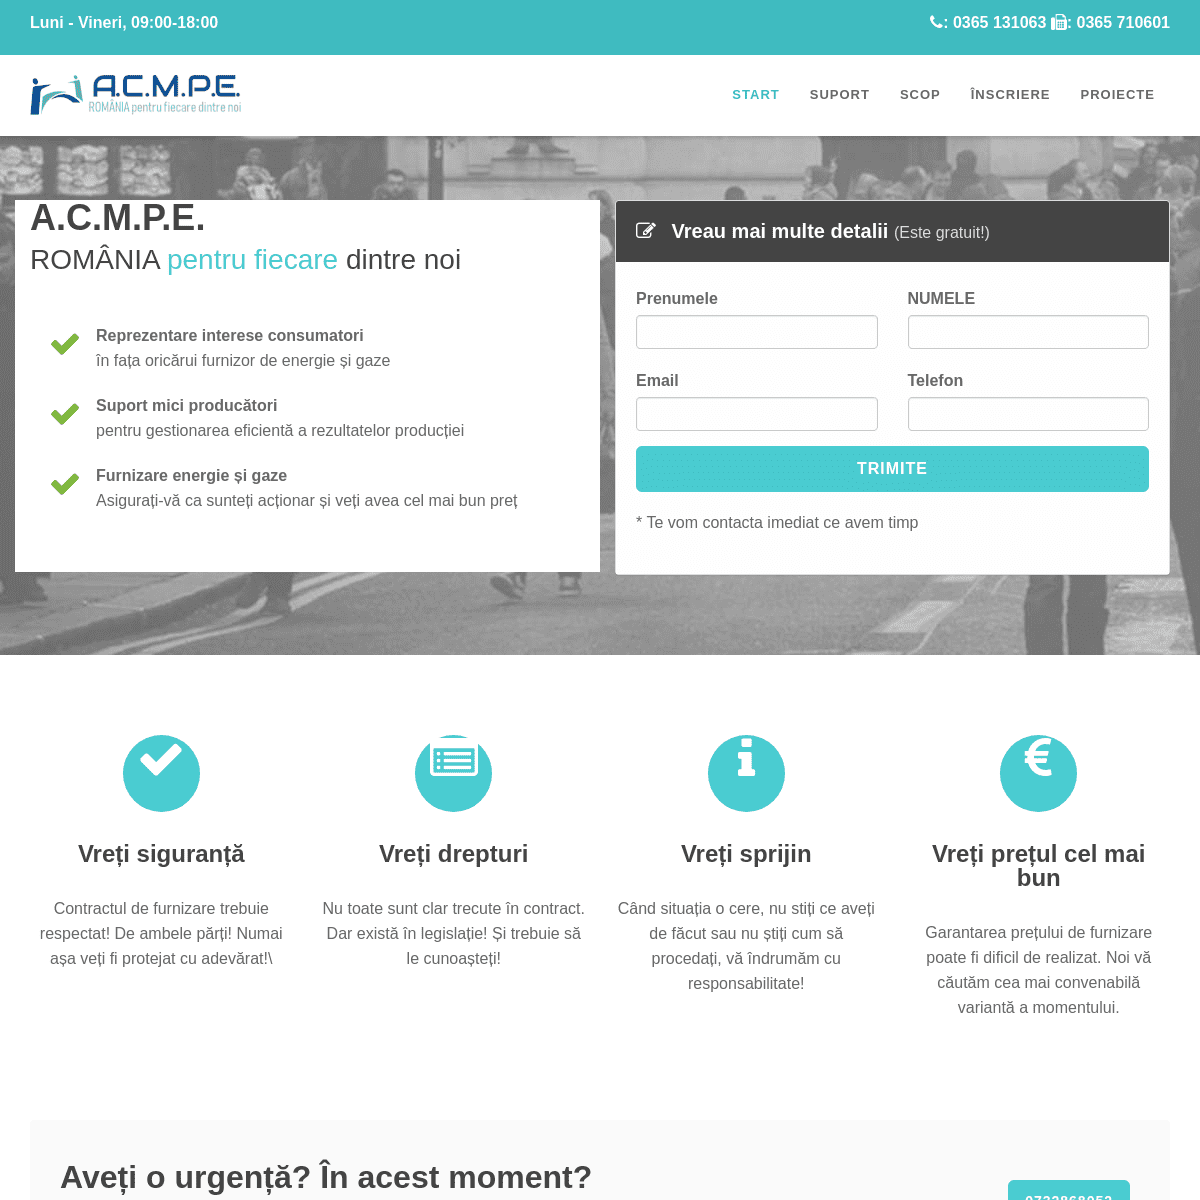 A complete backup of acmpe.org